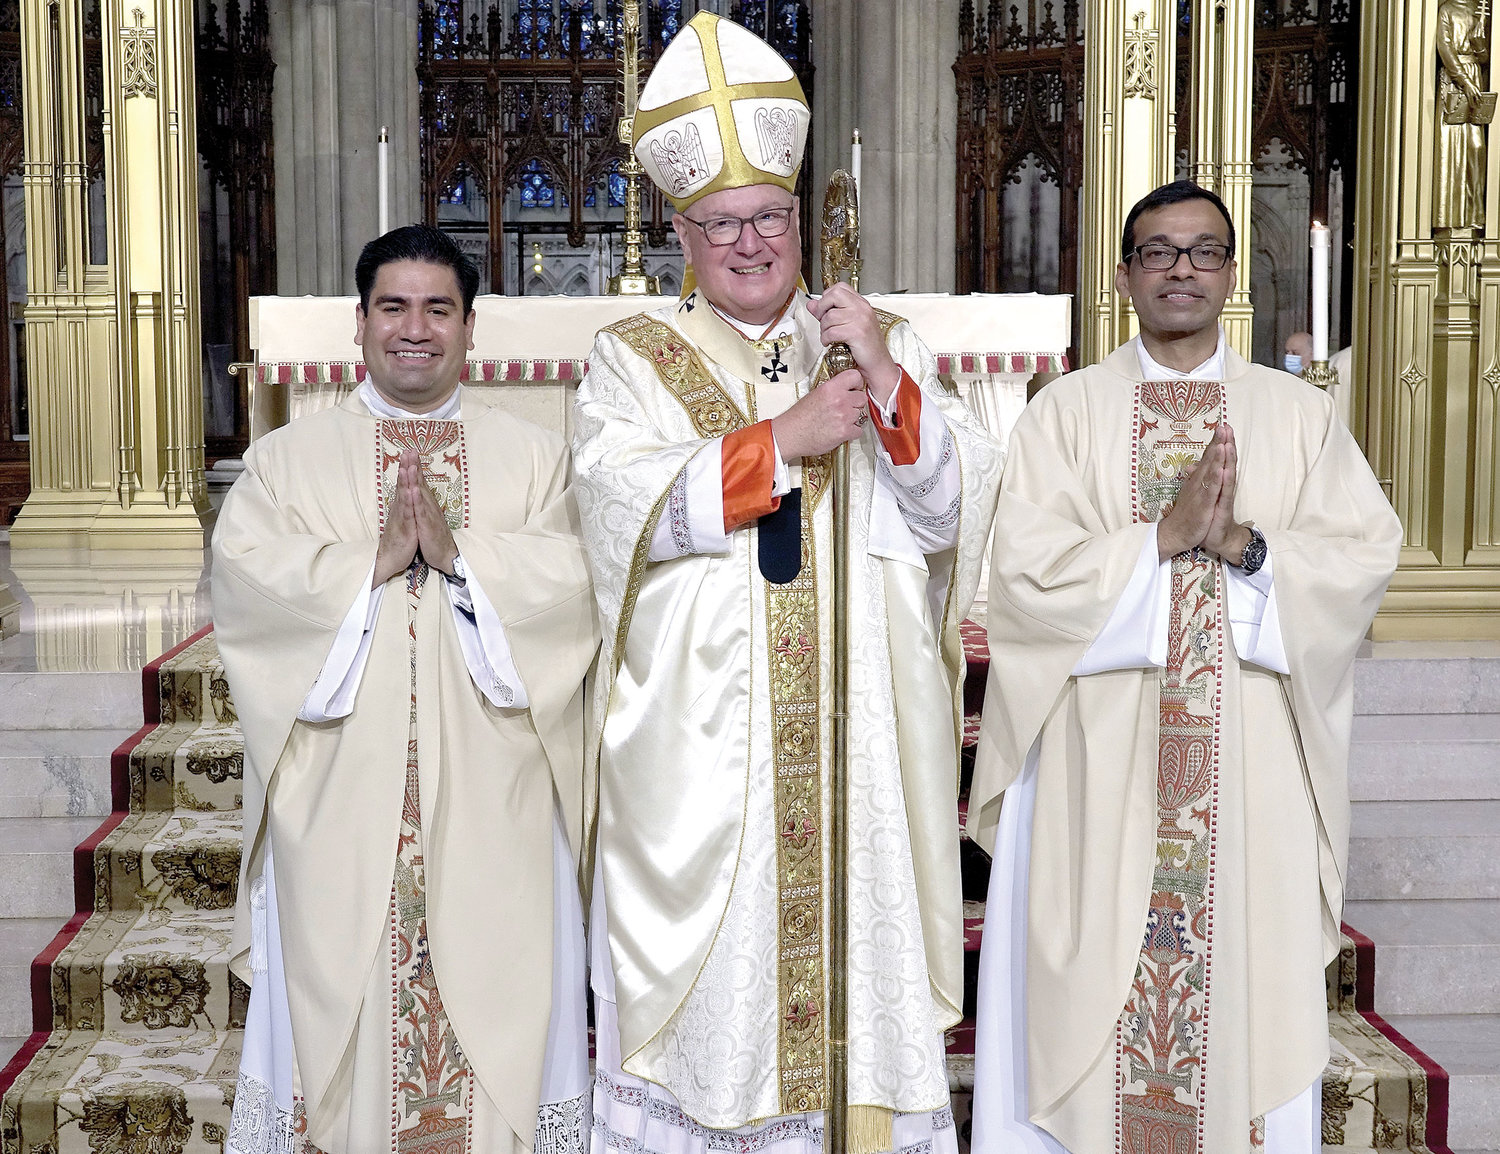 Cardinal Dolan, left, smiles alongside the two new priests he ordained—one for the archdiocese, Father Luis M. Silva Cervantes, left, and the other for the Idente Missionaries, Father Roland P. Pereira, M.Id. The cardinal served as principal celebrant at the Mass of Ordination of Priests June 26 at St. Patrick’s Cathedral.